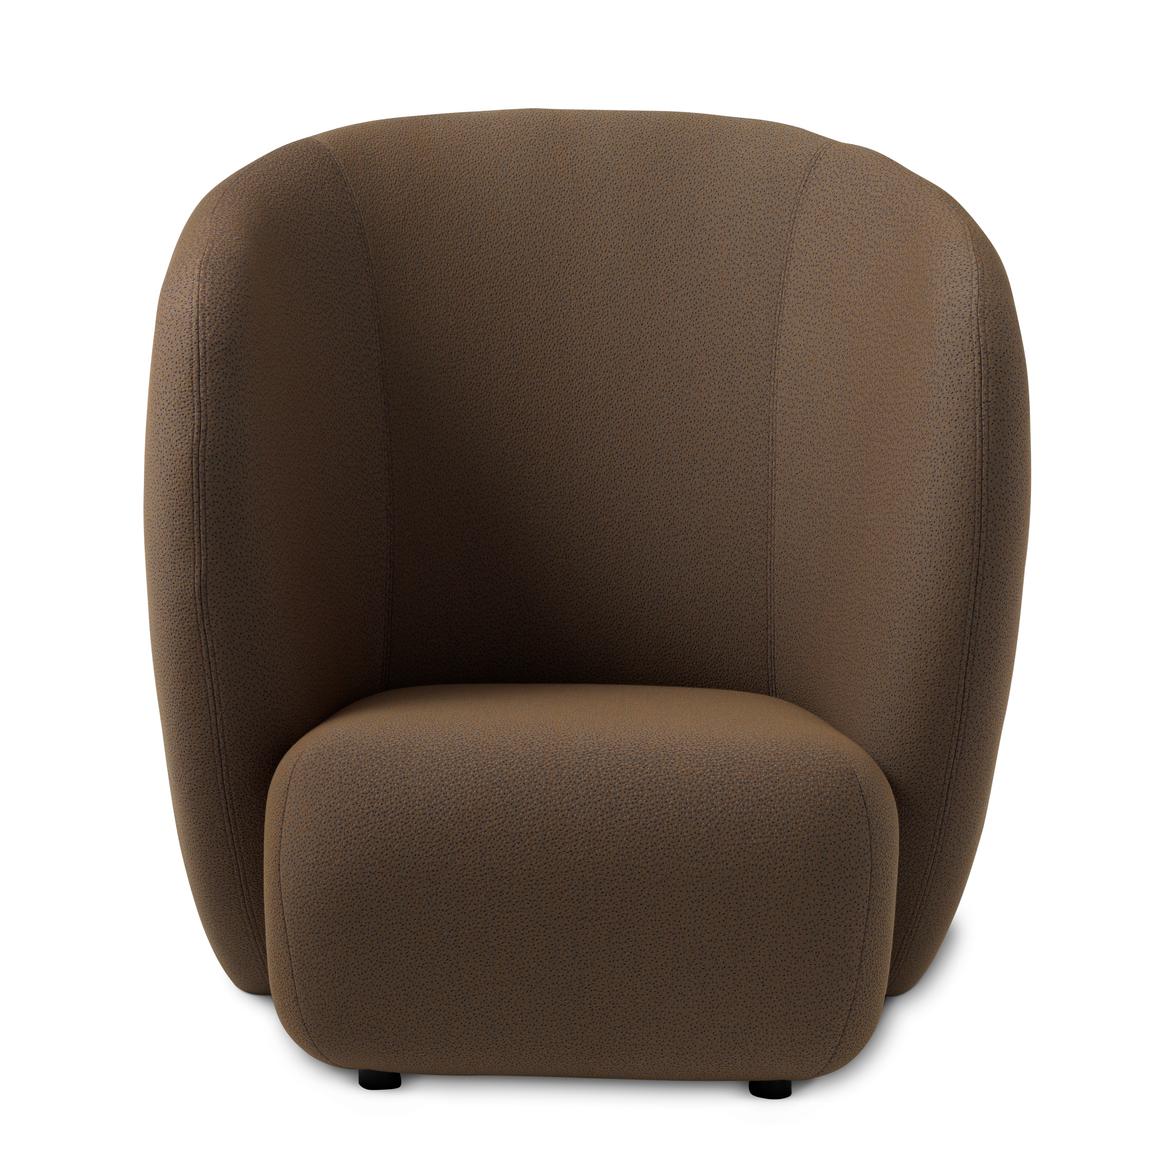 Haven lounge chair Sprinkles Cappuccino brown by Warm Nordic
Dimensions: D 107 x W 84 x H 110 cm
Material: Textile upholstery, Foam, Spring system, Wood.
Weight: 50 kg
Also available in different colours and finishes.

The Haven armchair is a